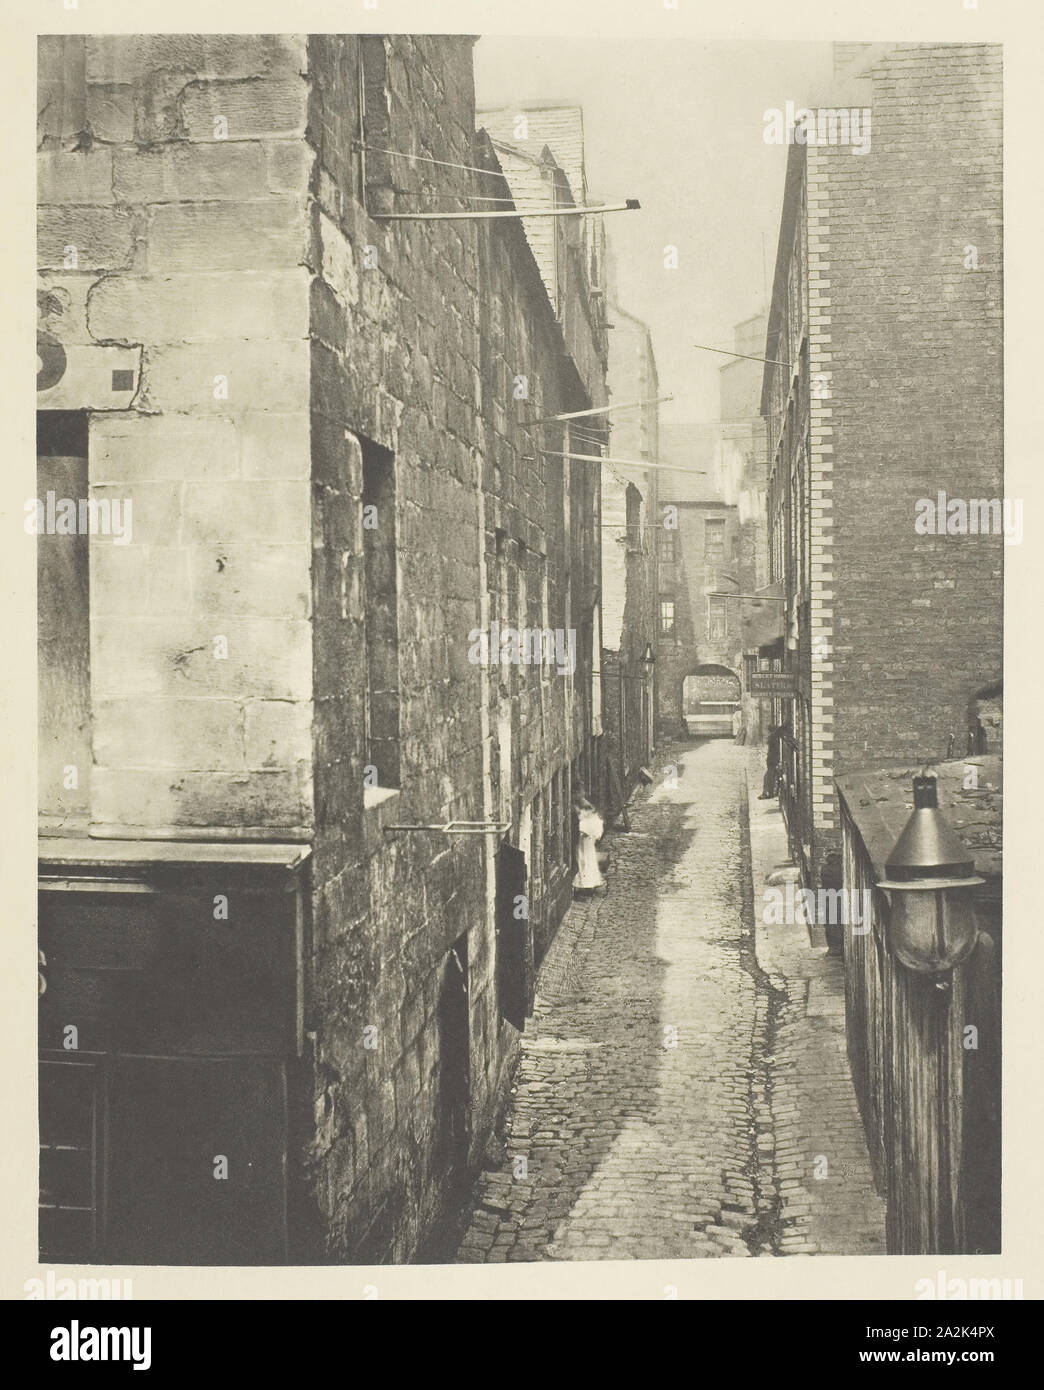 Laigh Kirk Close, 1868, Thomas Annan, Scottish, 1829–1887, Scotland, Photogravure, plate 23 from the book 'The Old Closes & Streets of Glasgow' (1900), 22.3 x 17.7 cm (image), 38 x 27.3 cm (paper Stock Photo